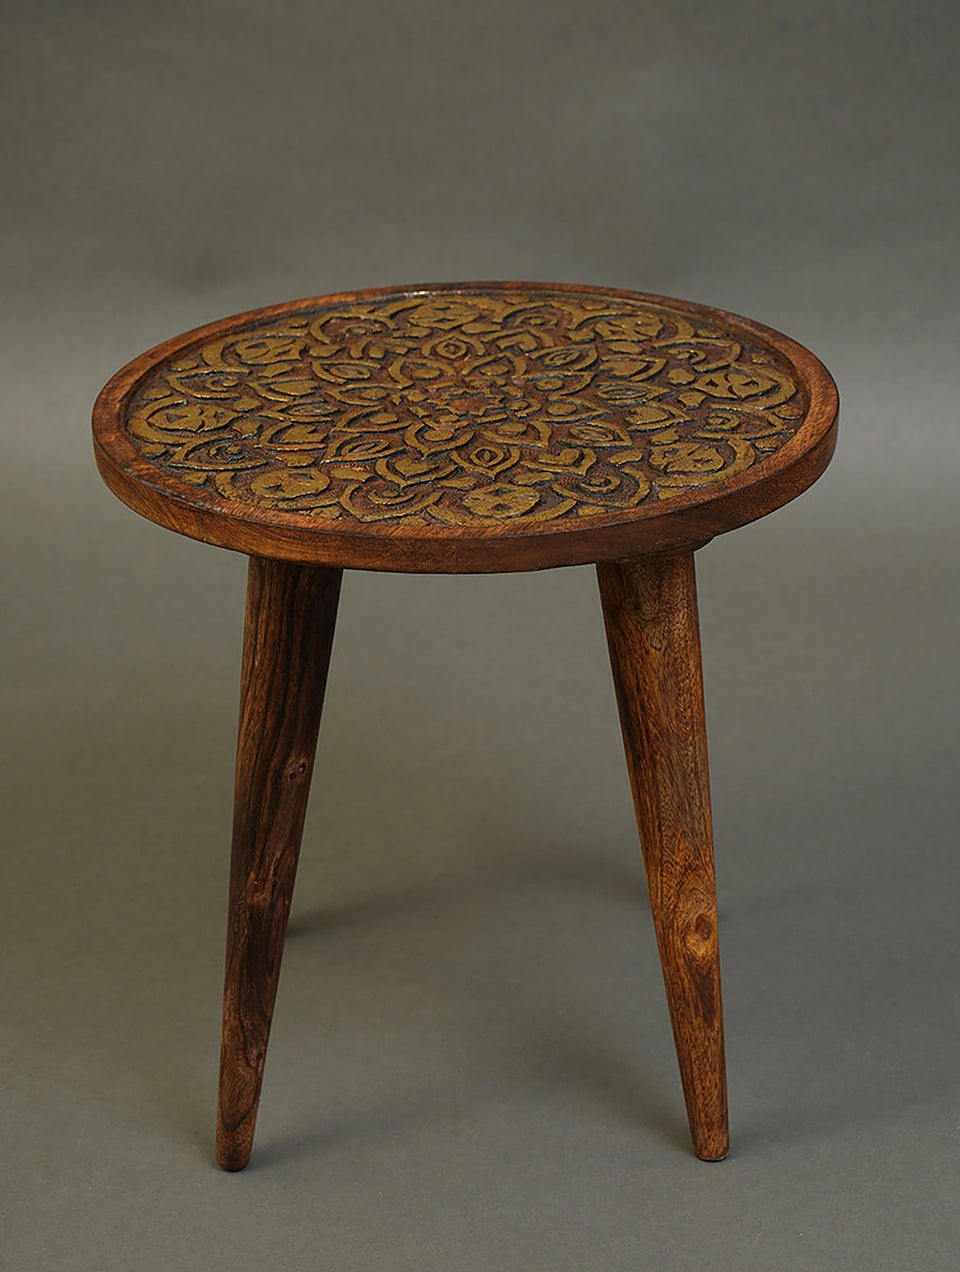 Handcarved Floral Nesting Table With Gold Foiling